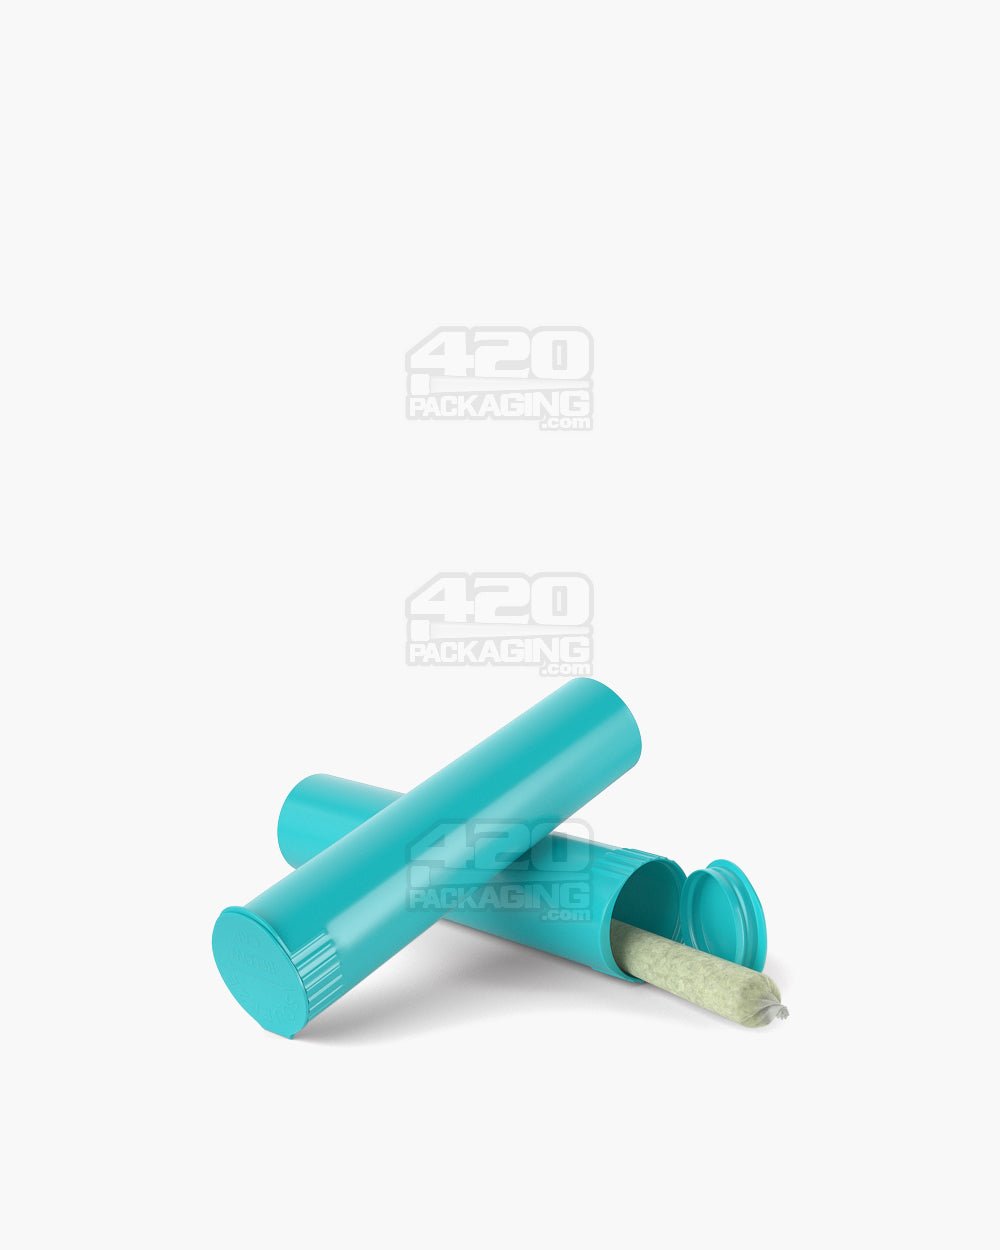 84mm Teal Opaque Child Resistant Pop Top Pre-Roll Tubes 1000/Box - 8